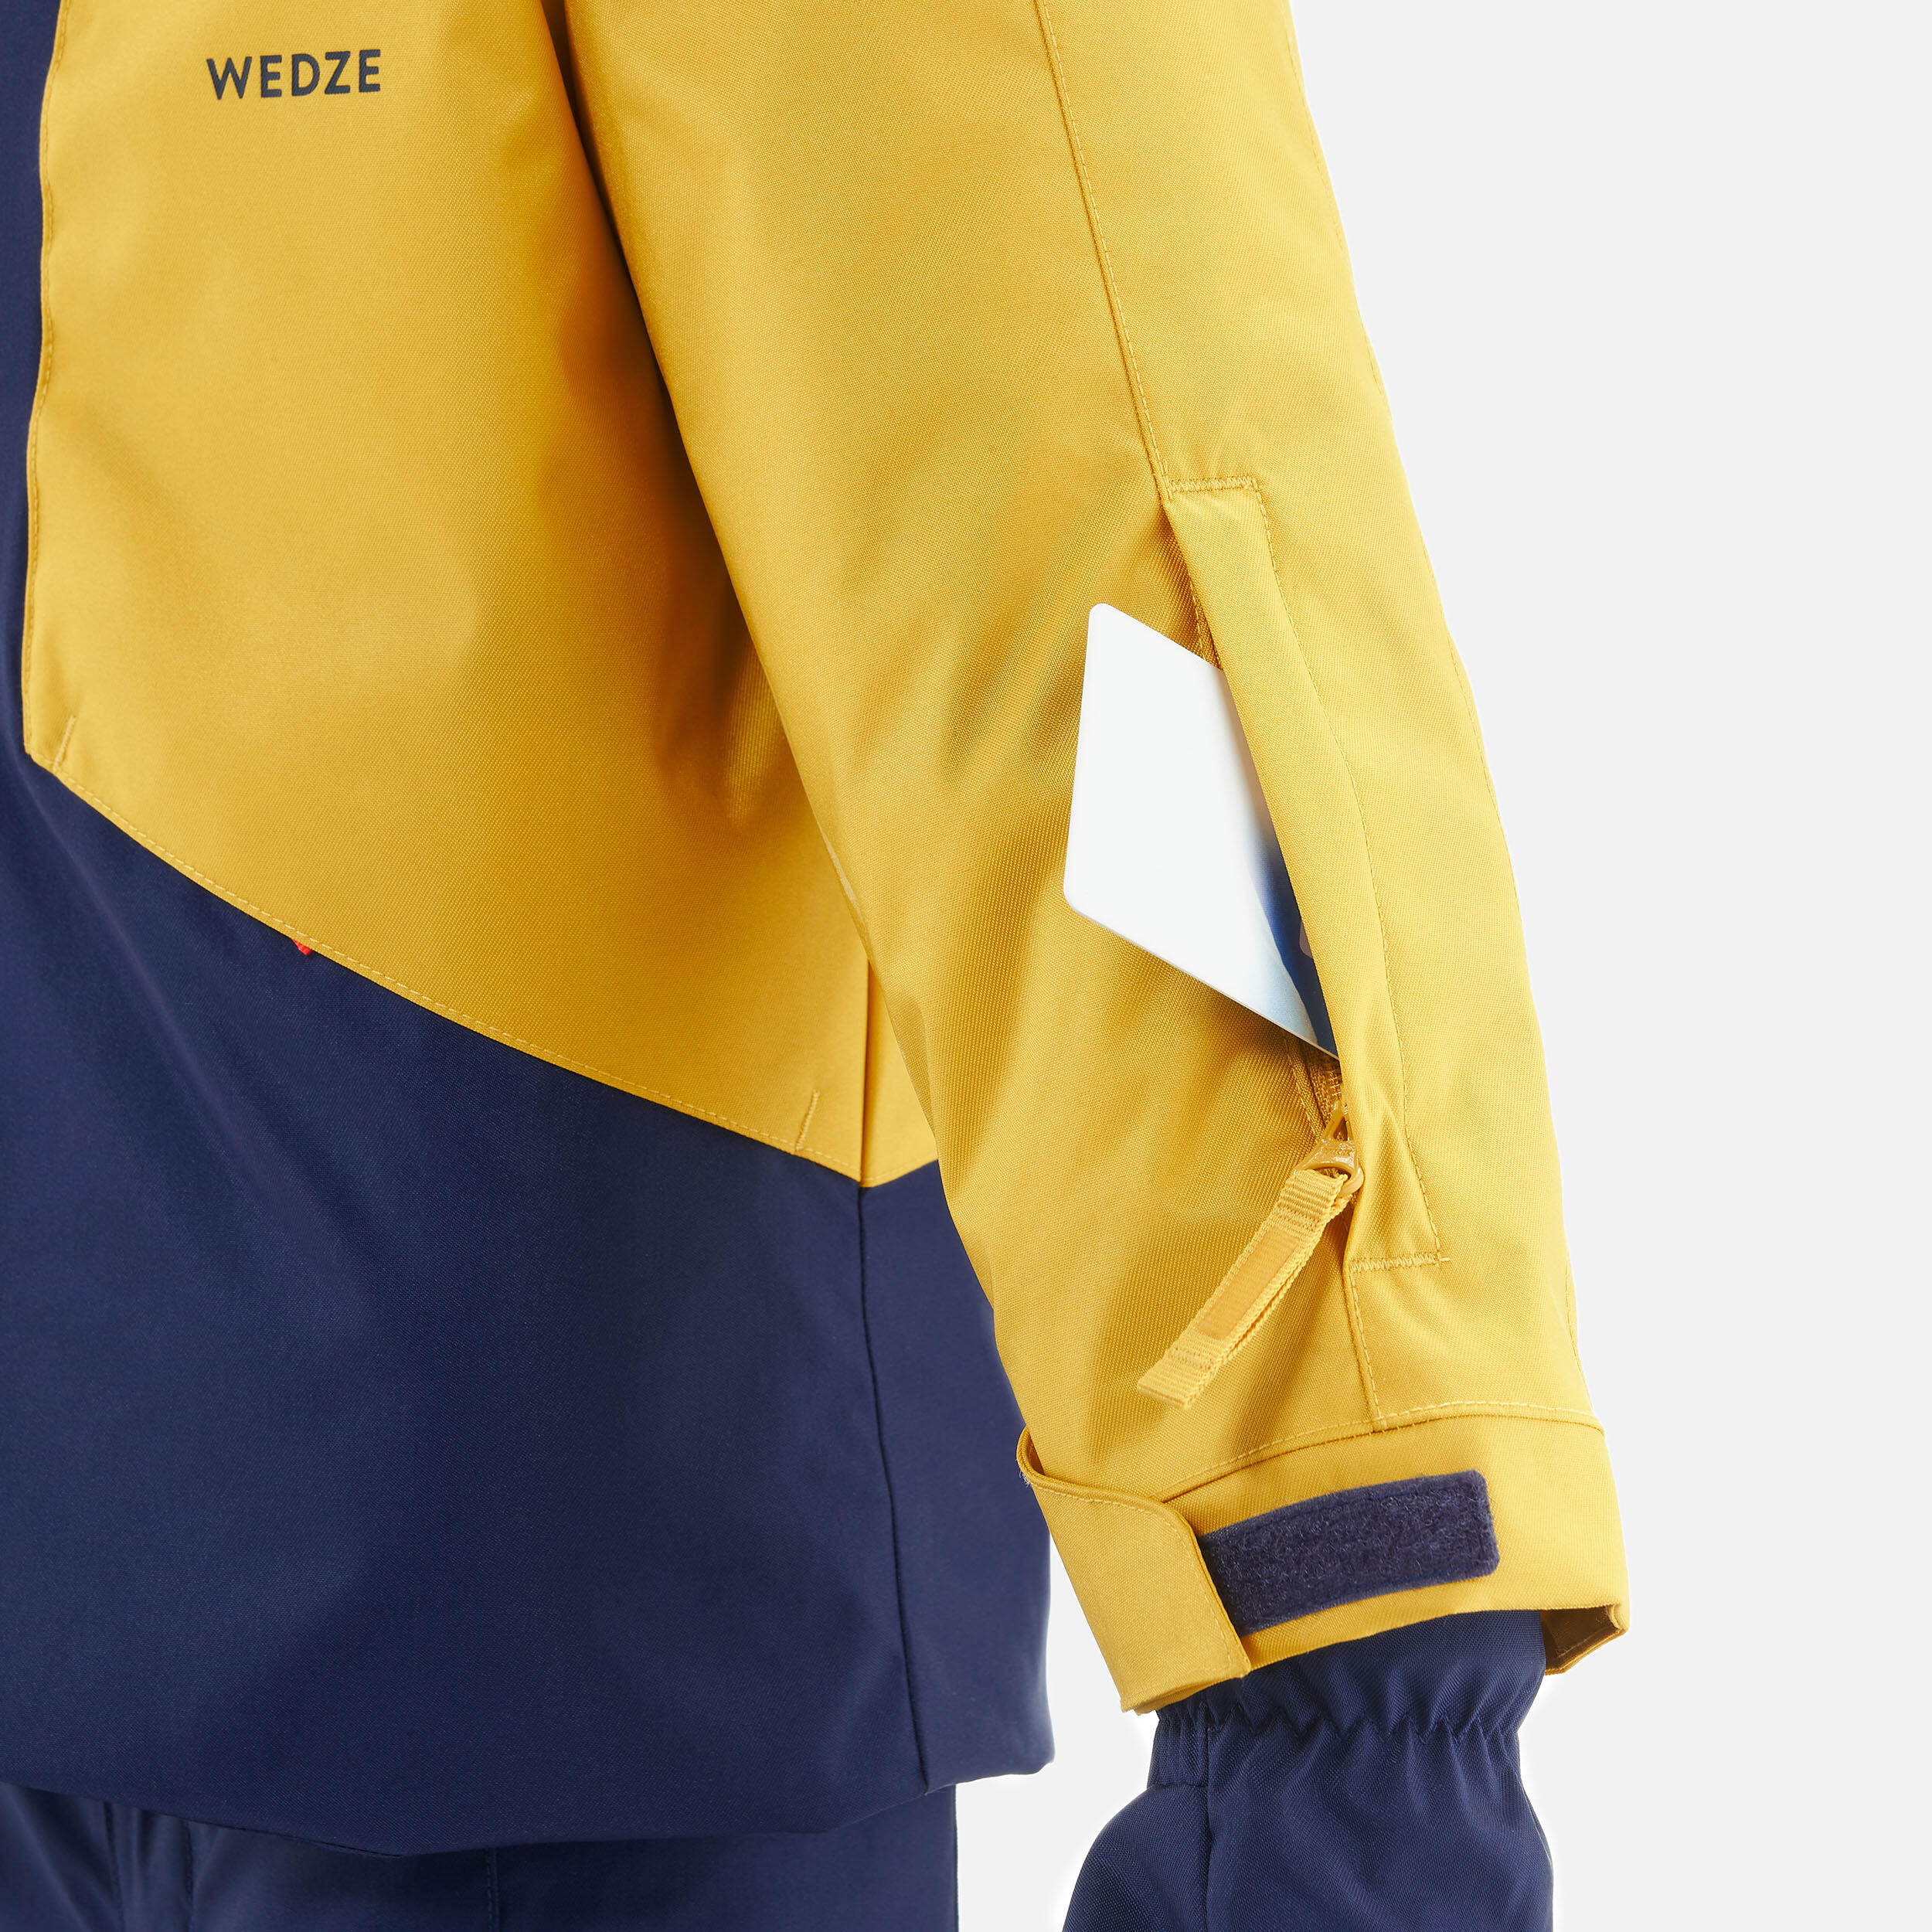 Kids’ Warm and Waterproof Ski Suit 580 - Yellow and Blue 8/15